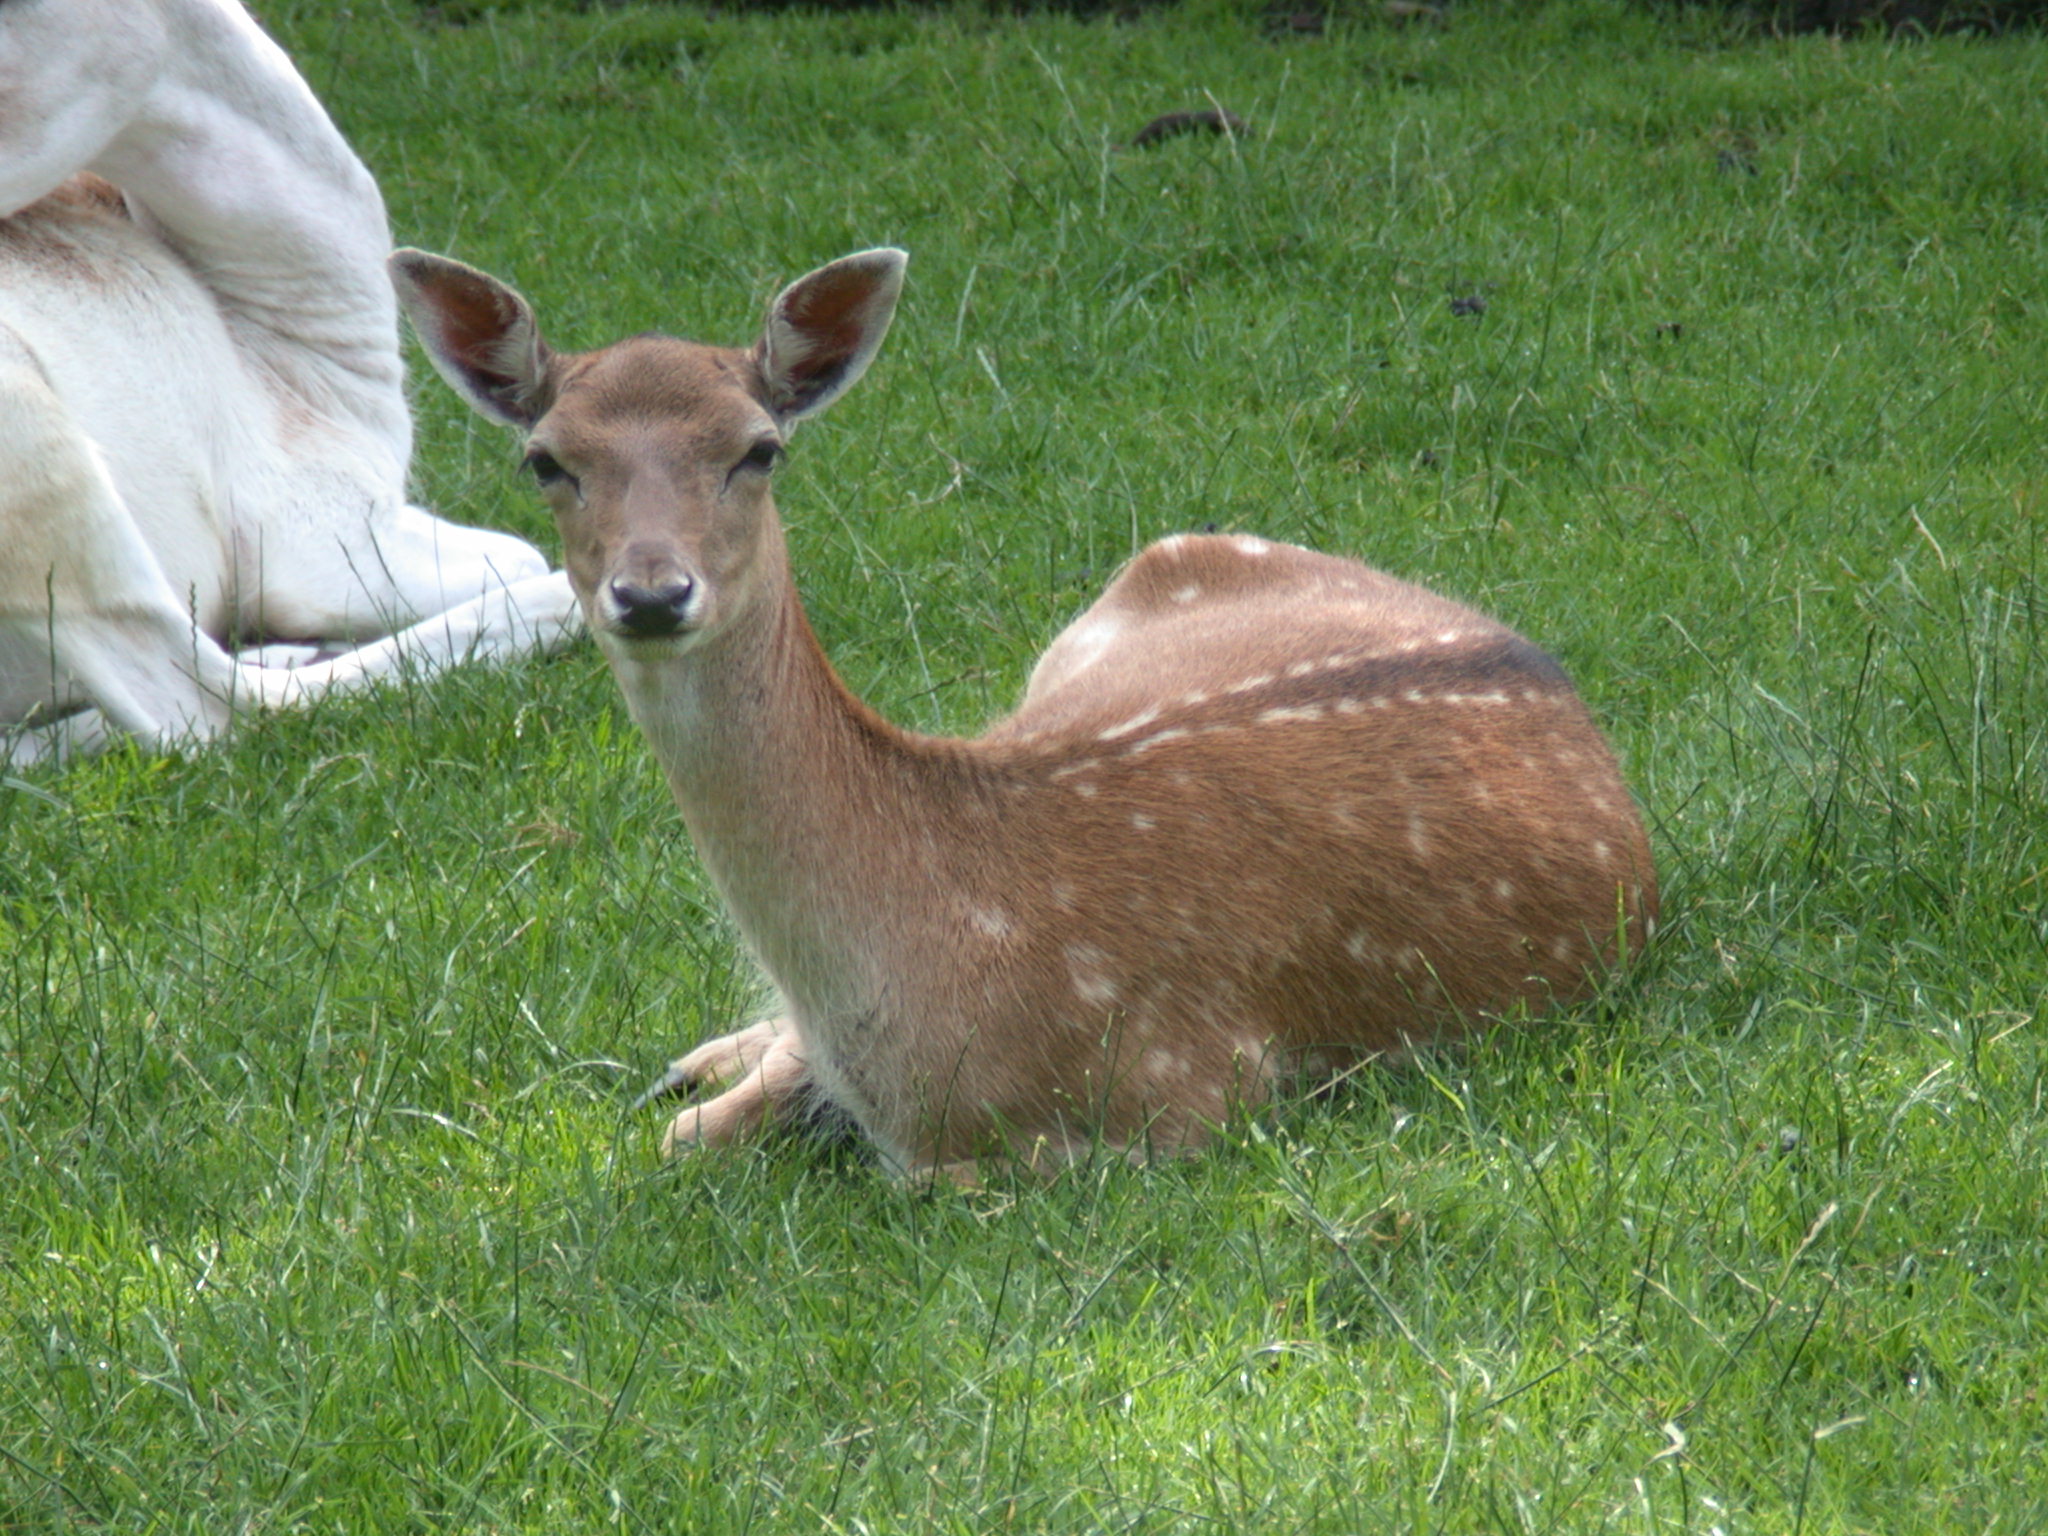 deer female lying spots spotted fur back ears petting-zoo pettingzoo petting zoo grass in the